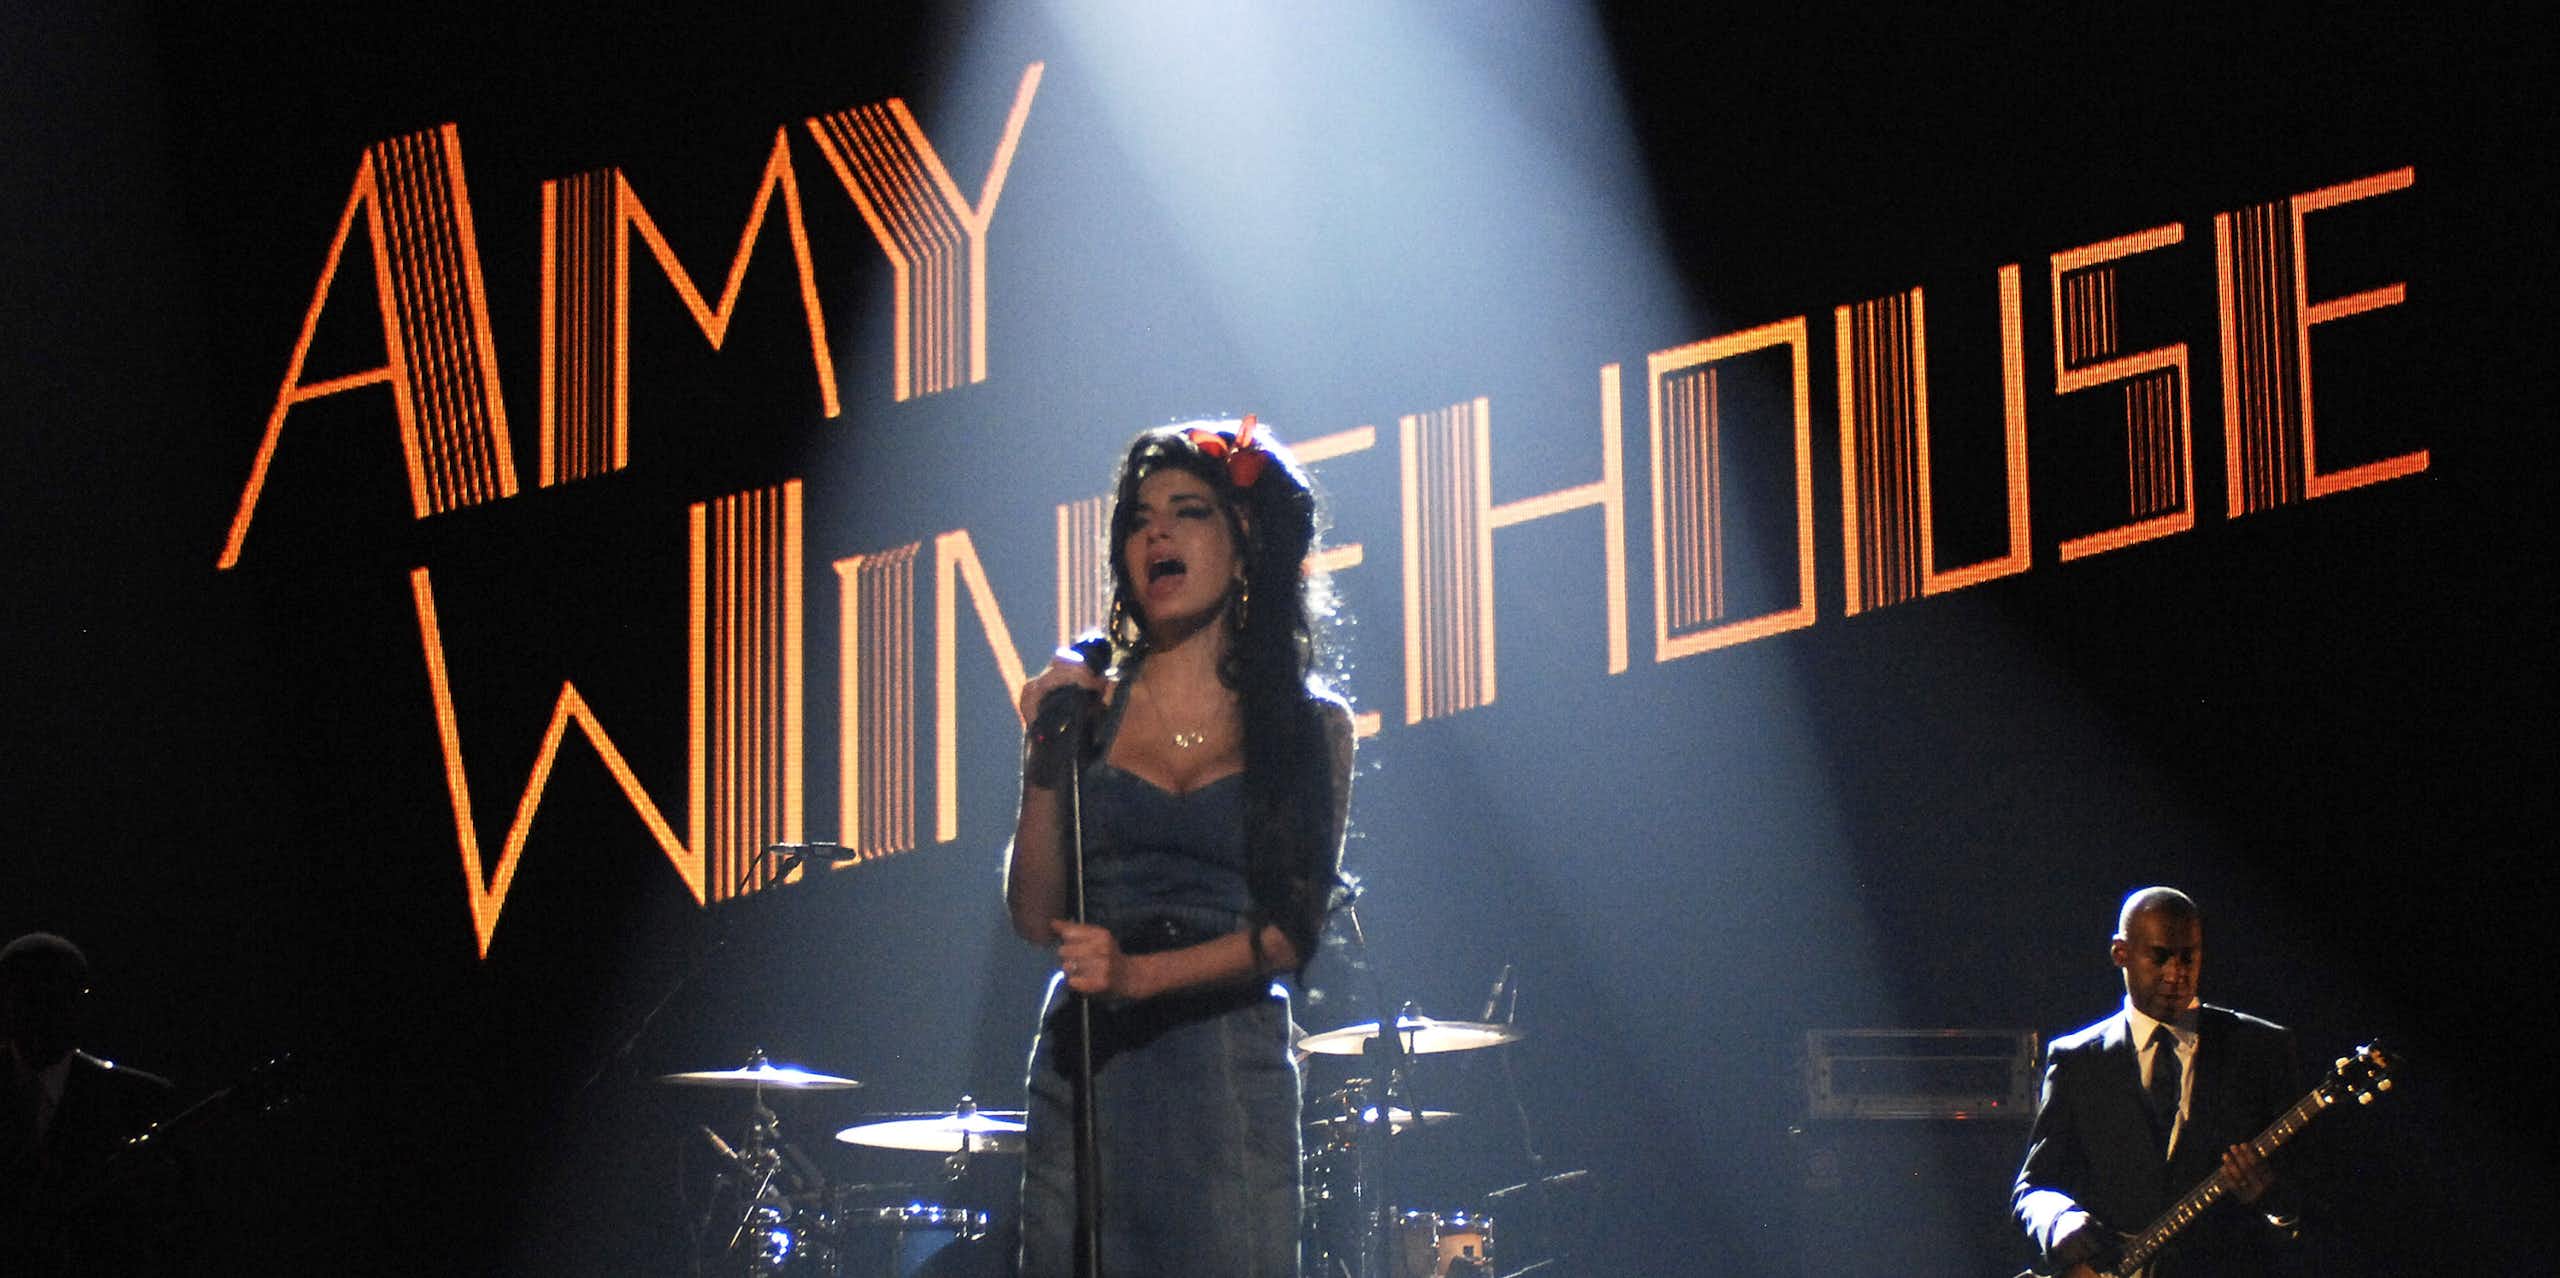 Late singer Amy Winehouse, whose name is displayed in lights, performs on a stage with musical instruments and a guitar player behind her.